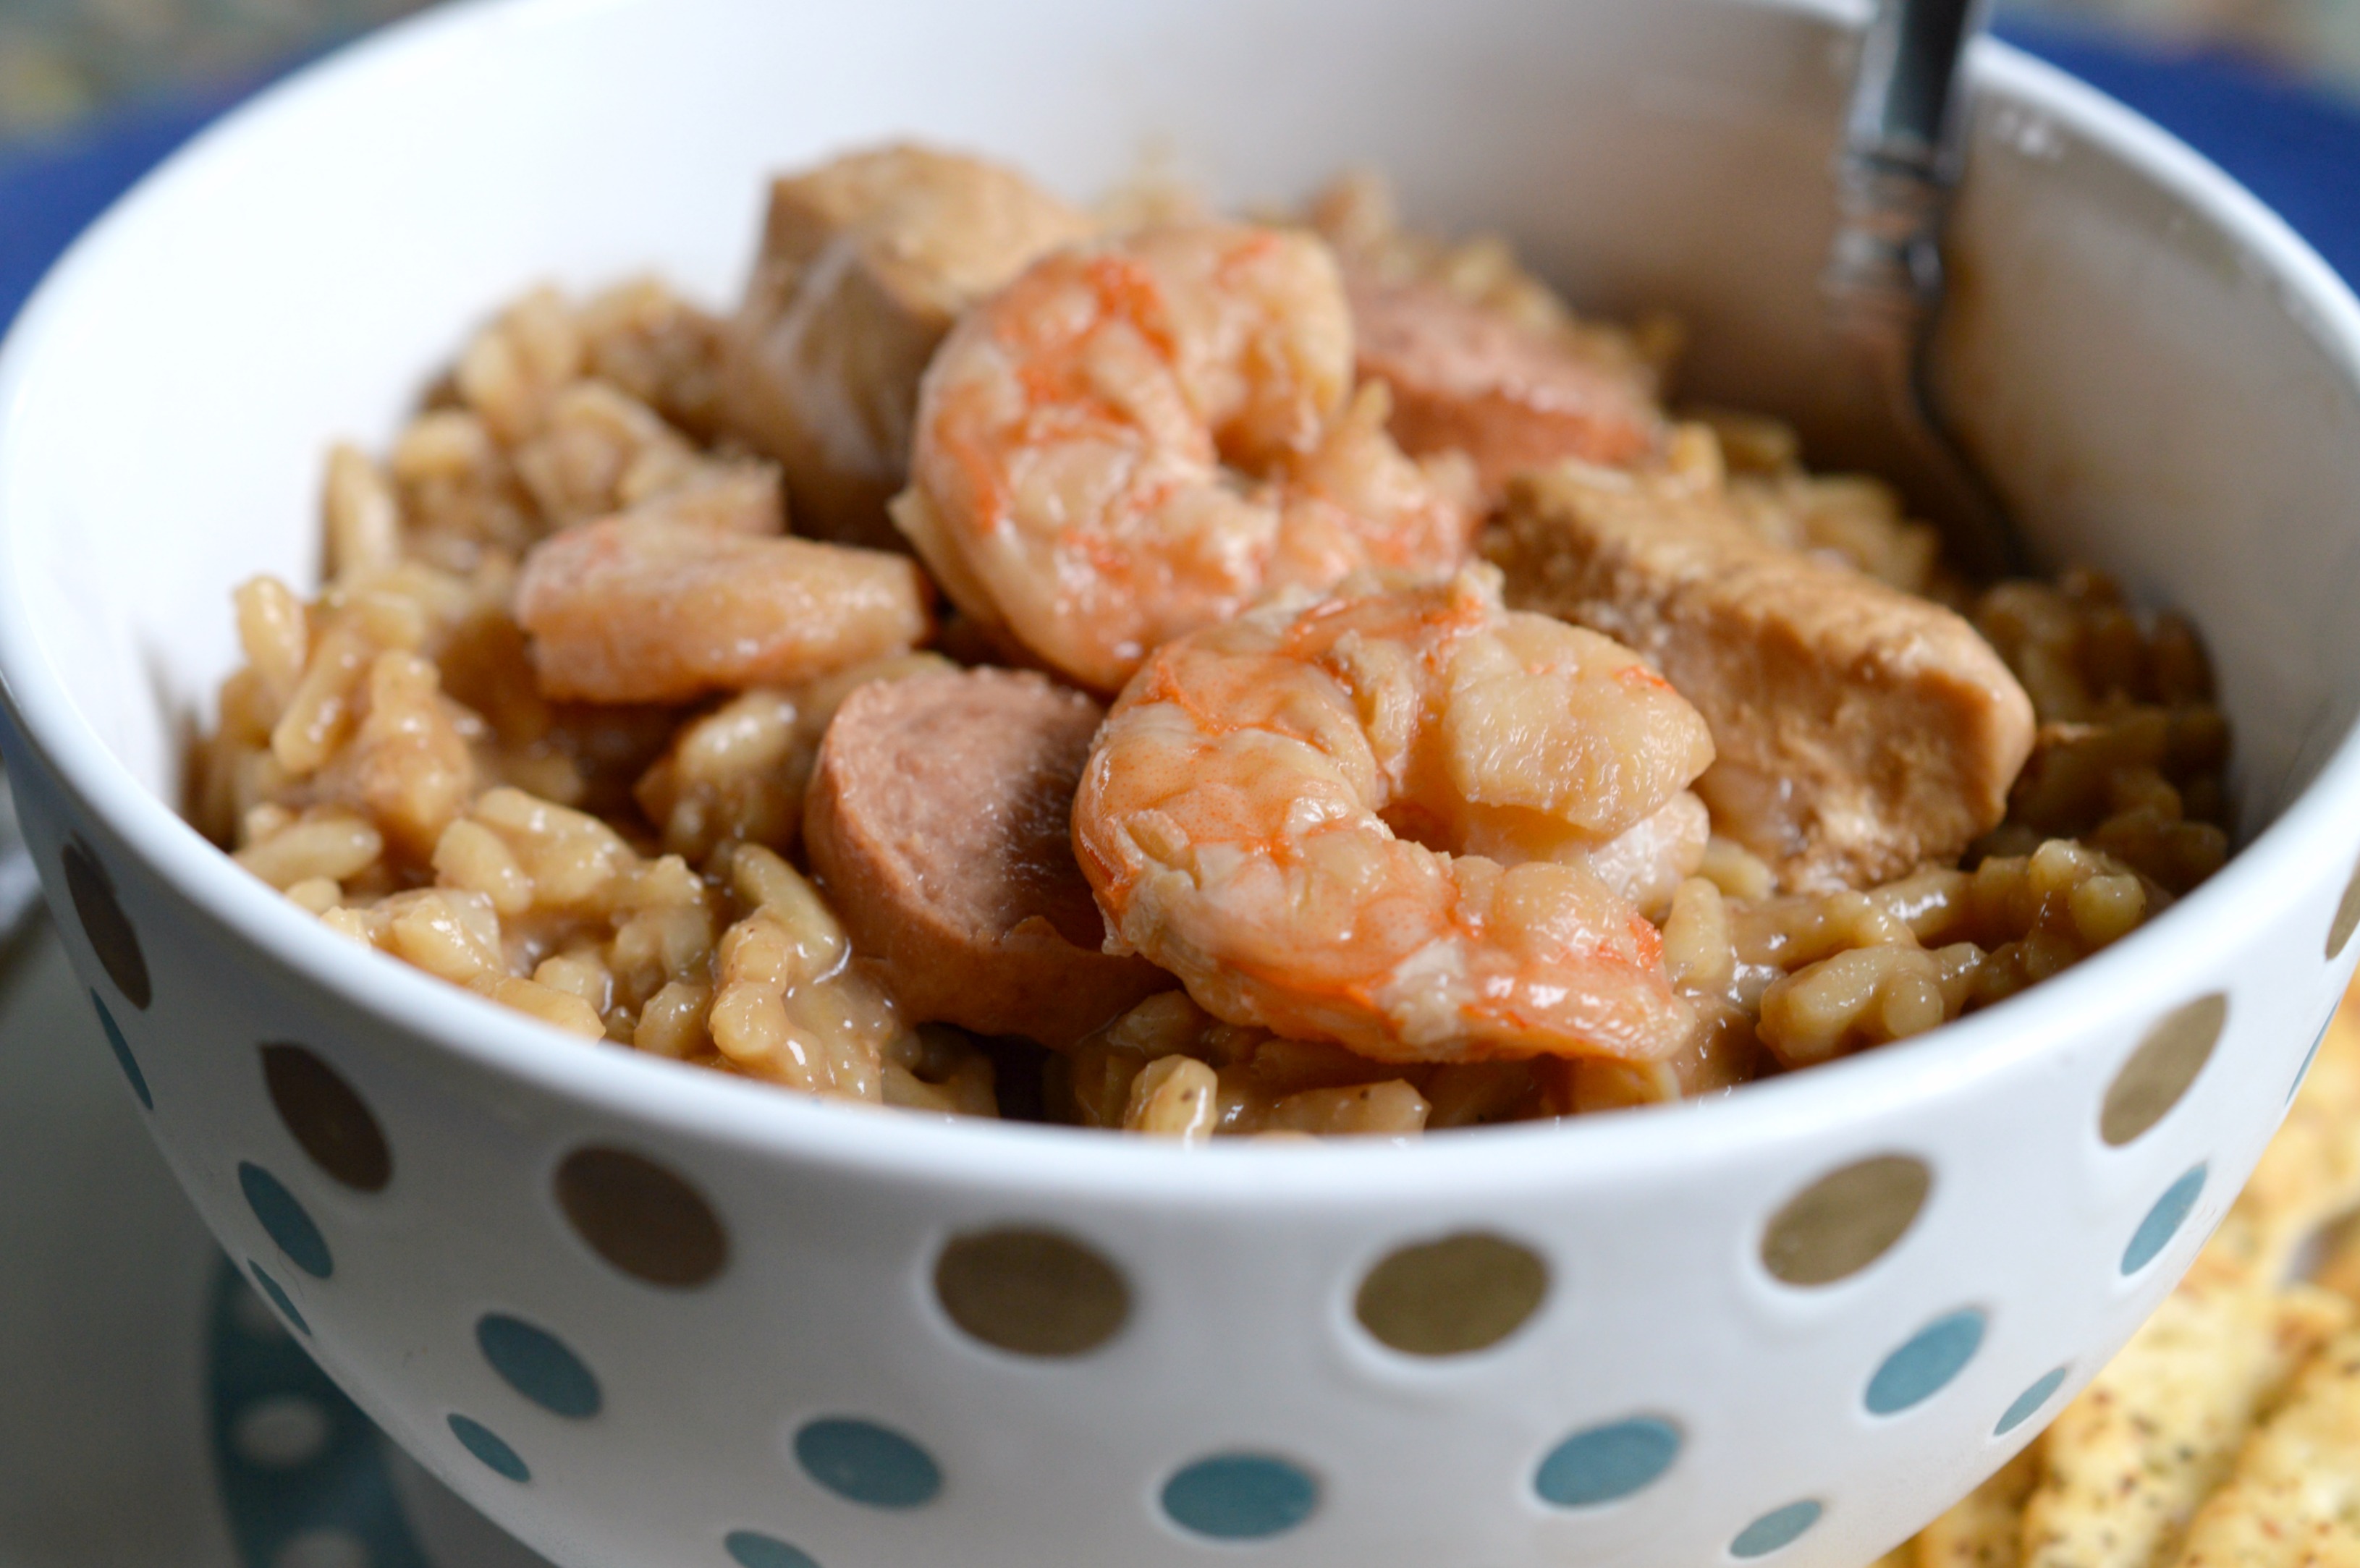 shrimp gumbo with sausage and chicken